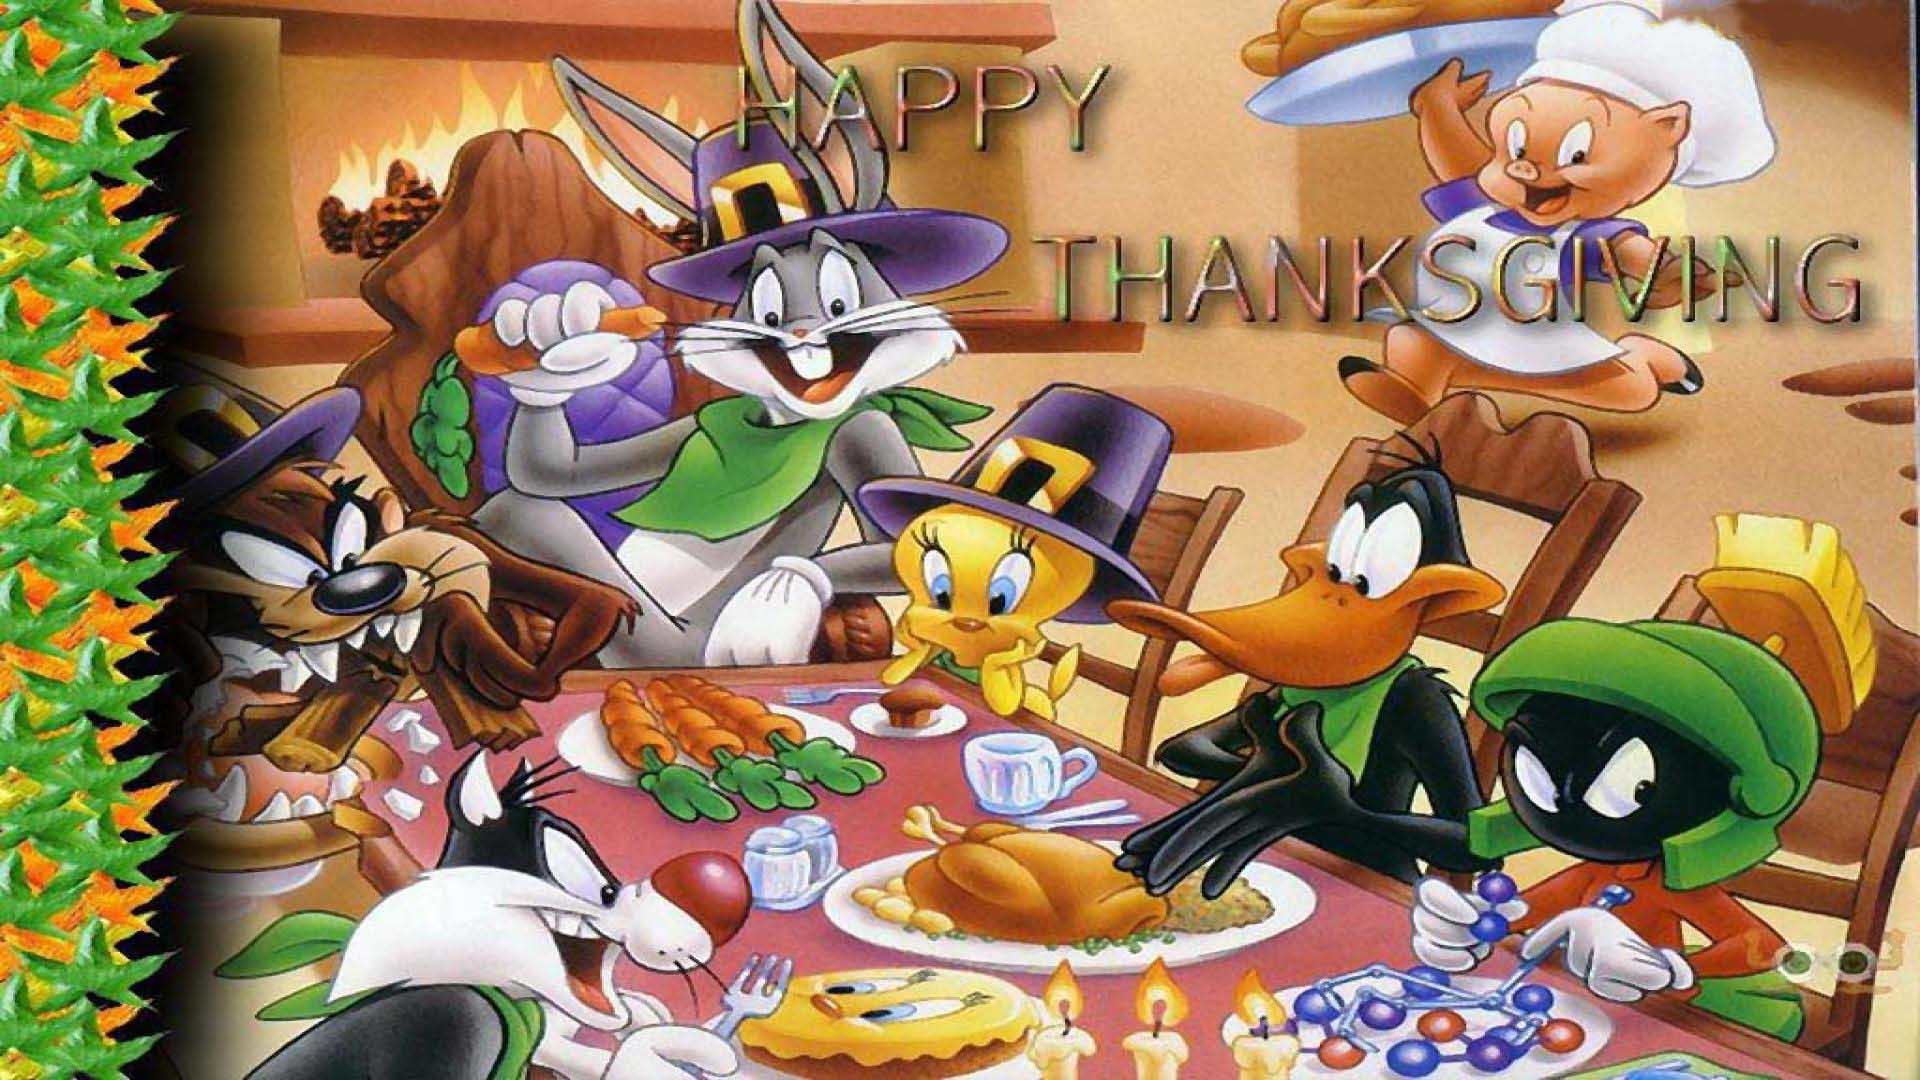 Snoopy Thanksgiving Wallpaper 55 images